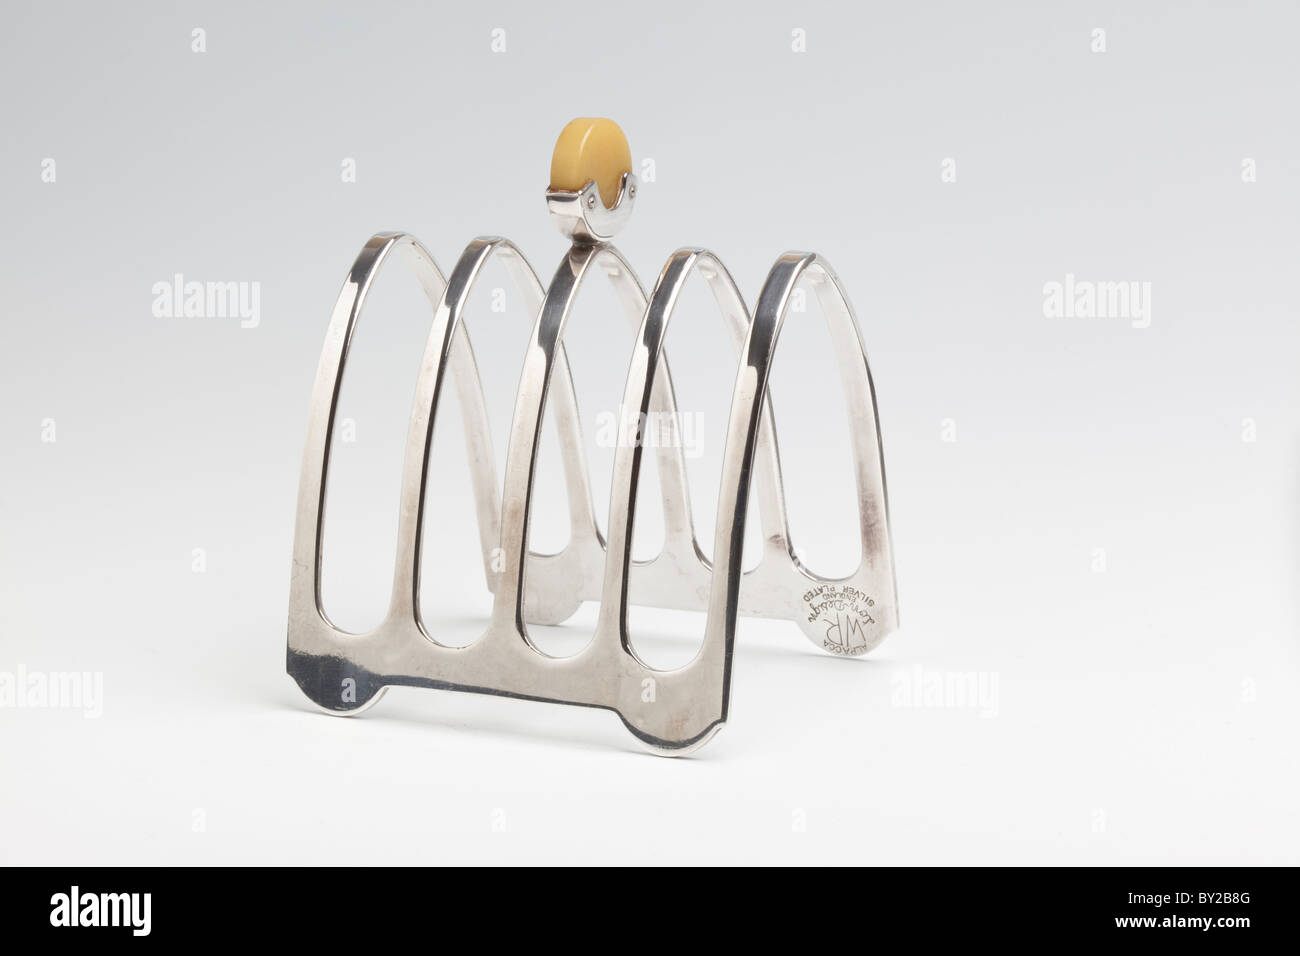 https://c8.alamy.com/comp/BY2B8G/silver-plated-toastrack-in-the-art-deco-style-1920s-BY2B8G.jpg